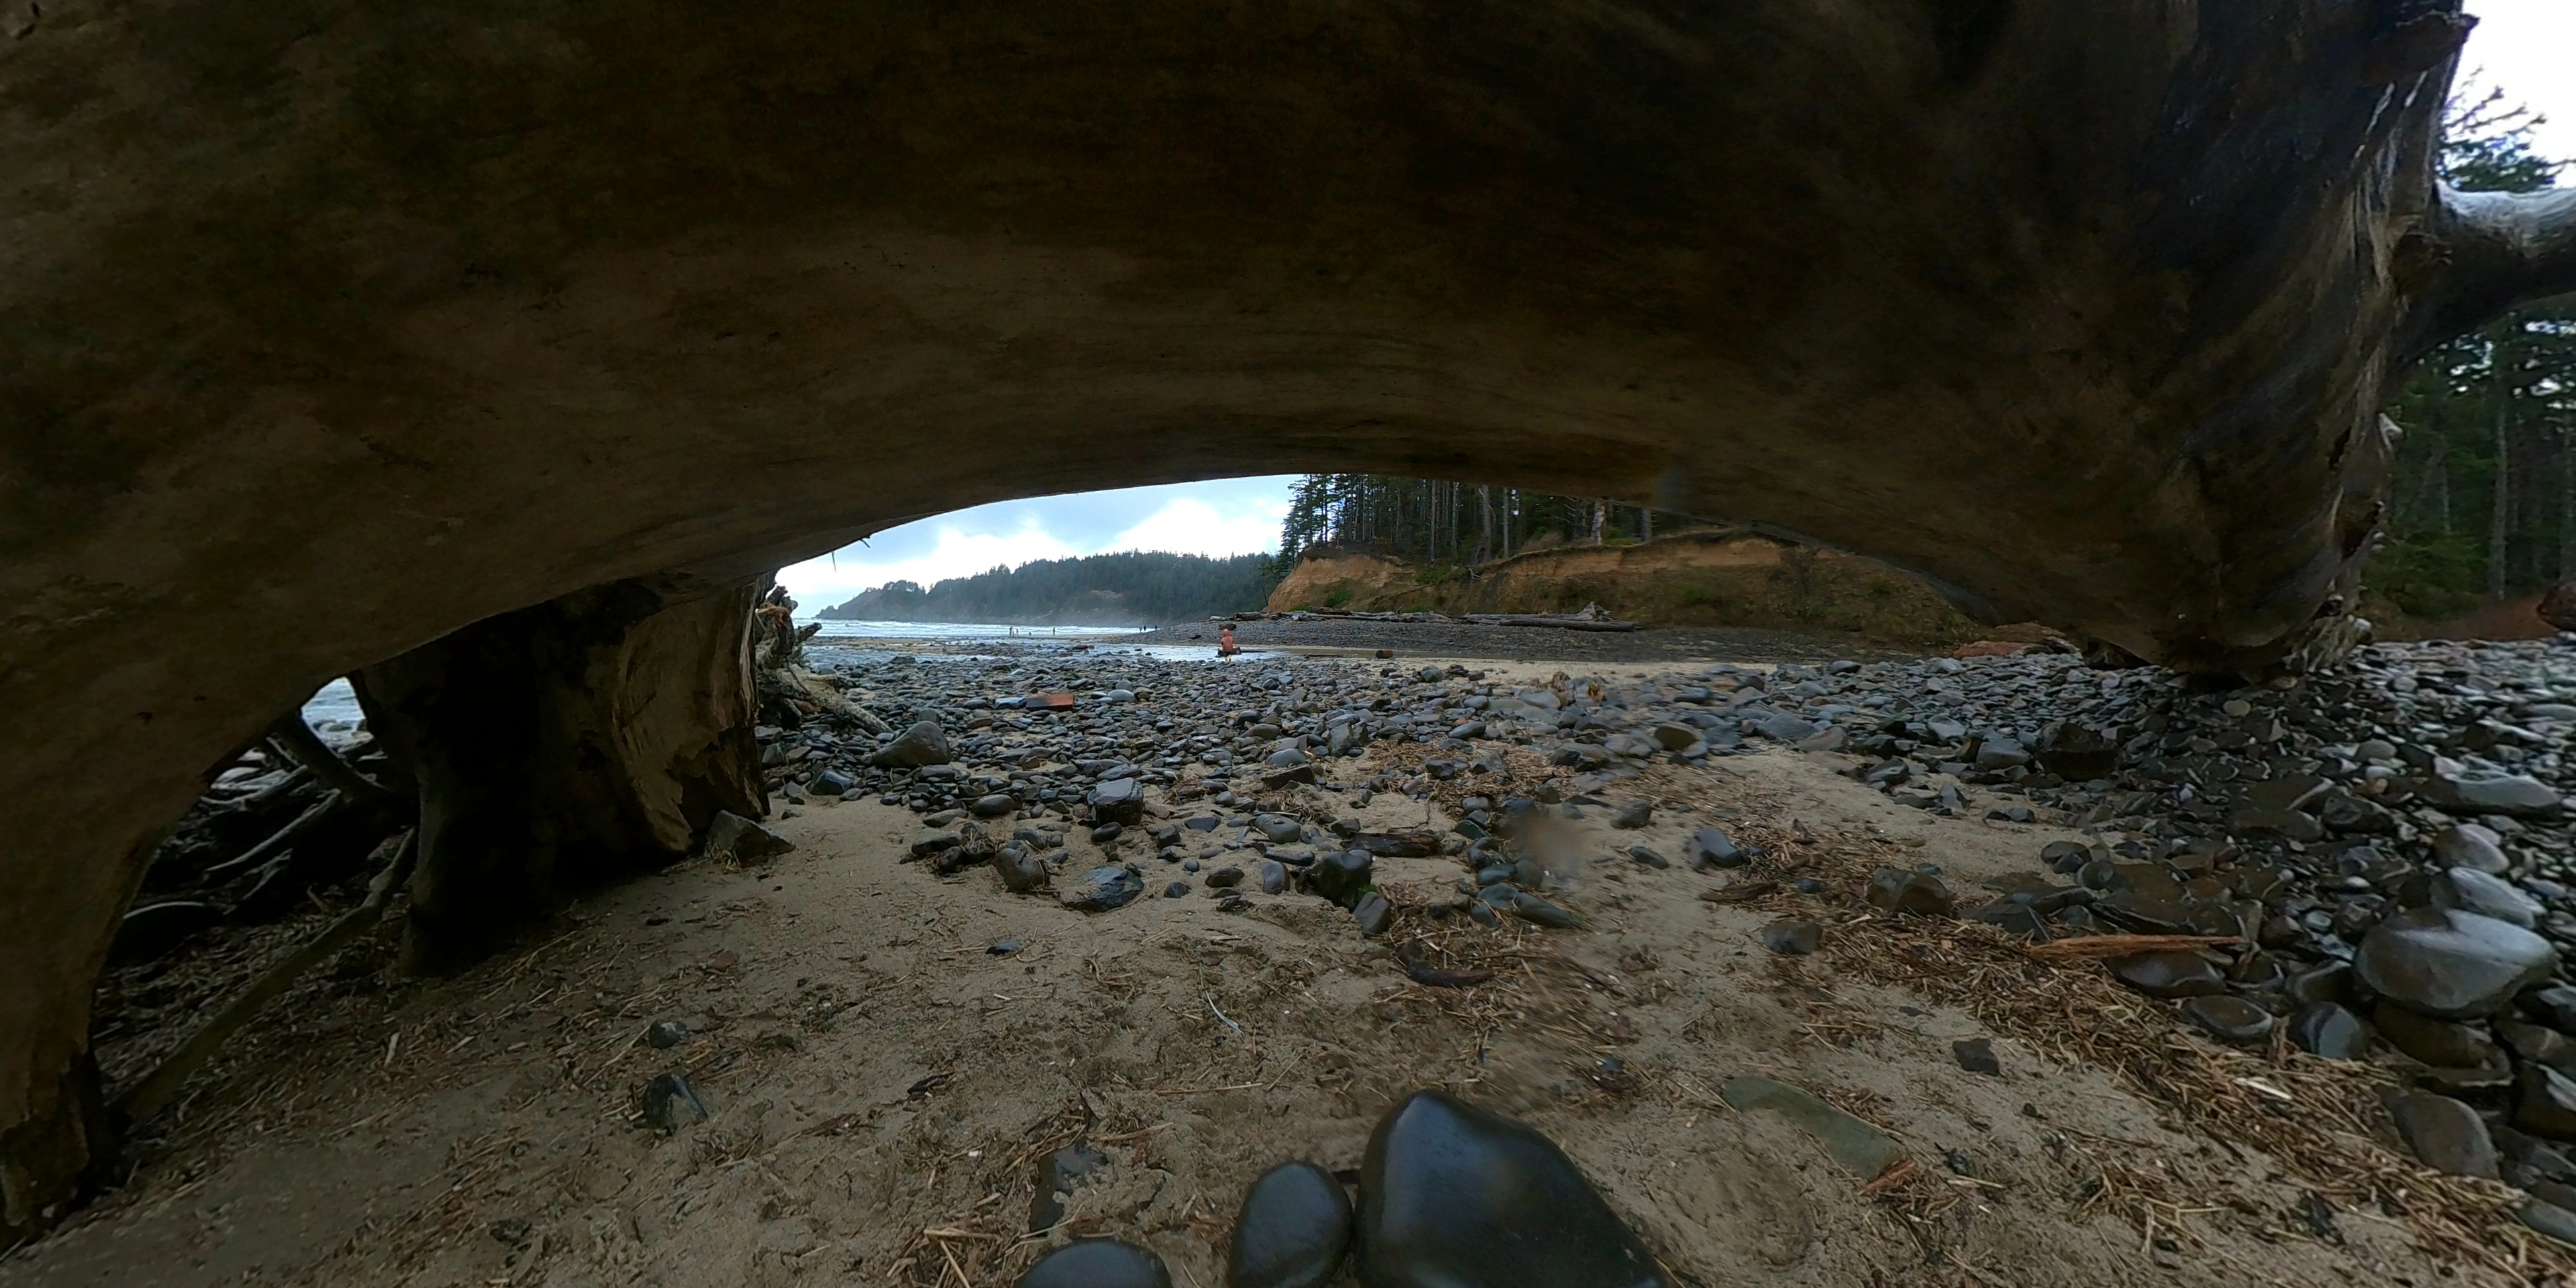 looking under a huge log on the beach